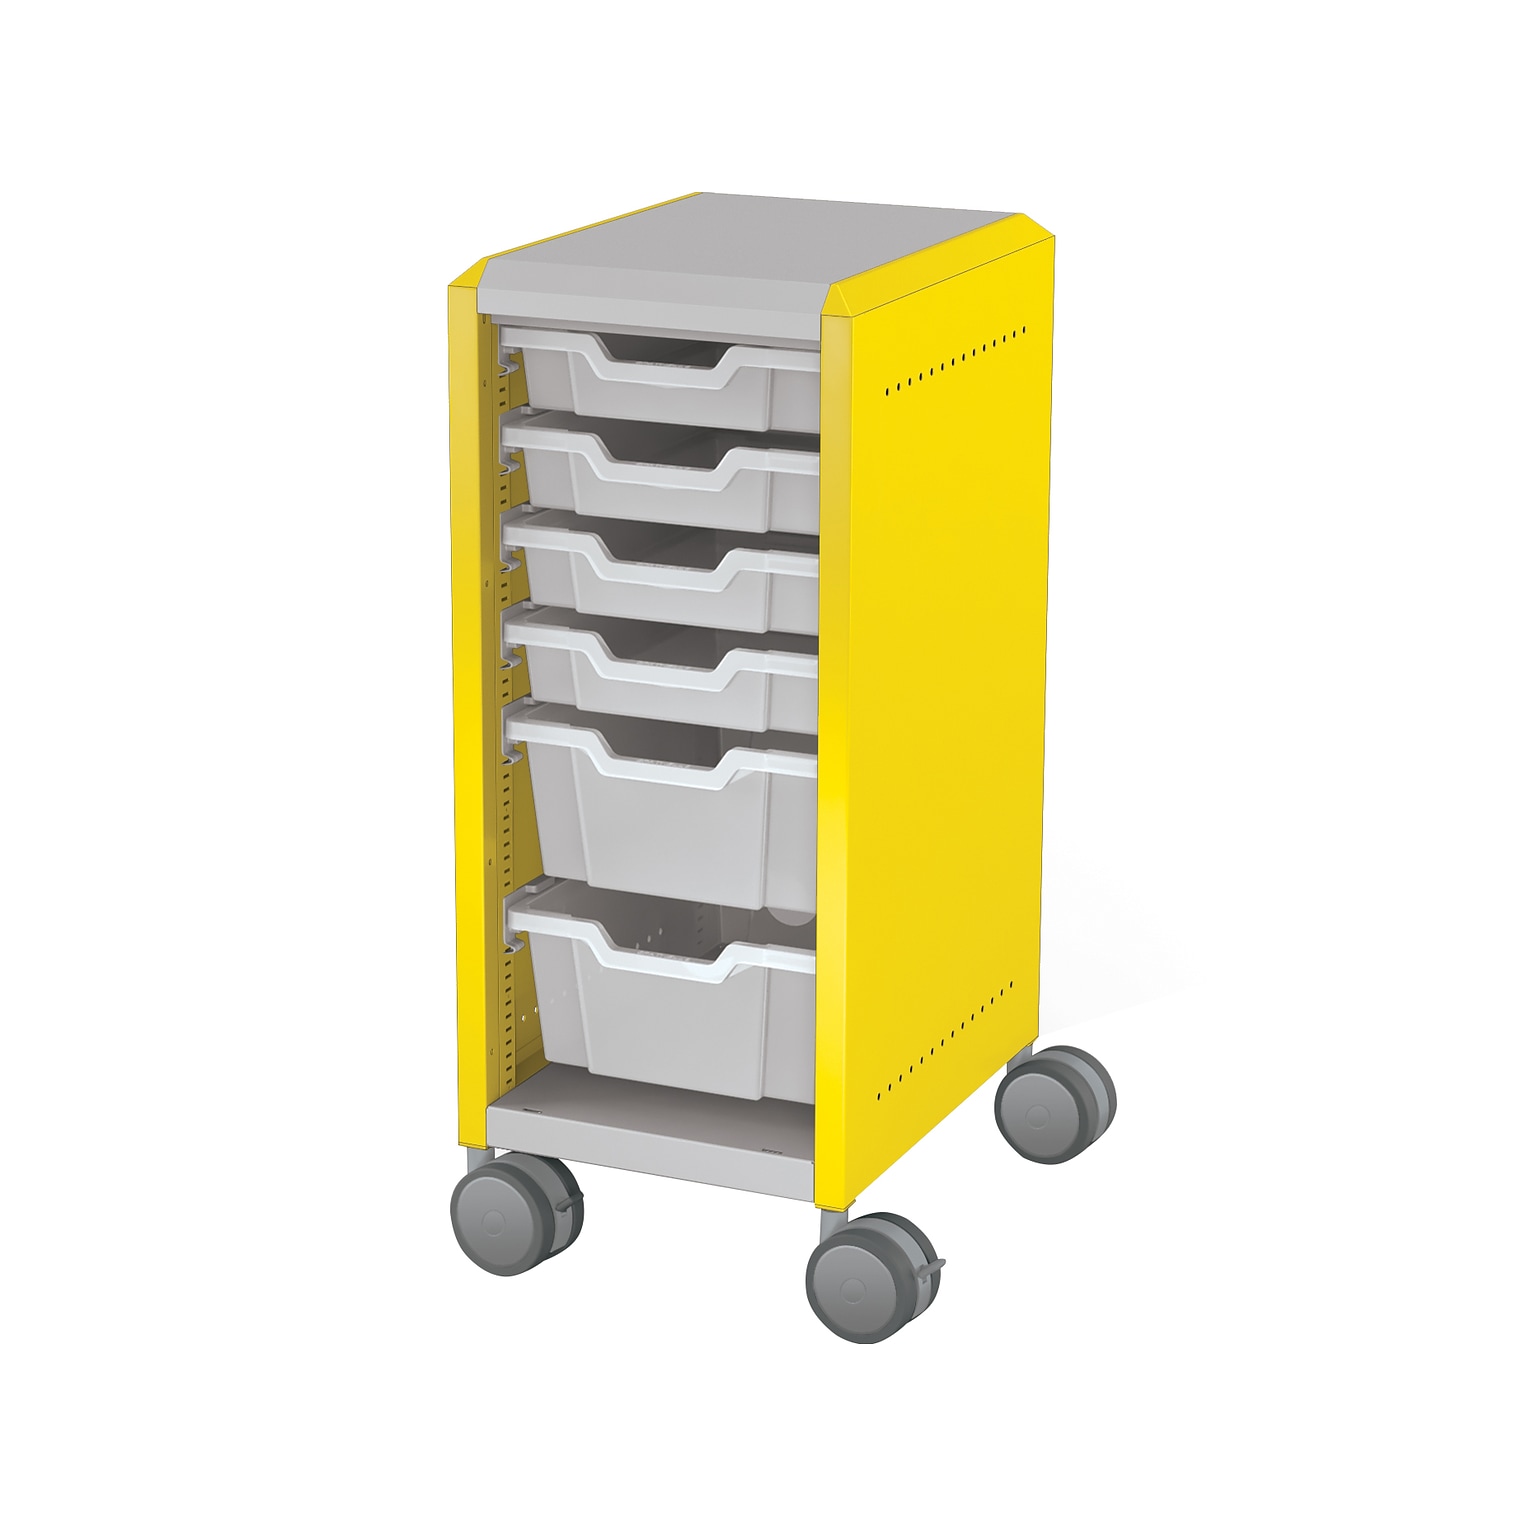 MooreCo Compass Mini H2 Mobile 6-Section Storage Cabinet, 36.13H x 14.88W x 19.13D, Platinum/Yellow Metal (B1A1G1C1X0)